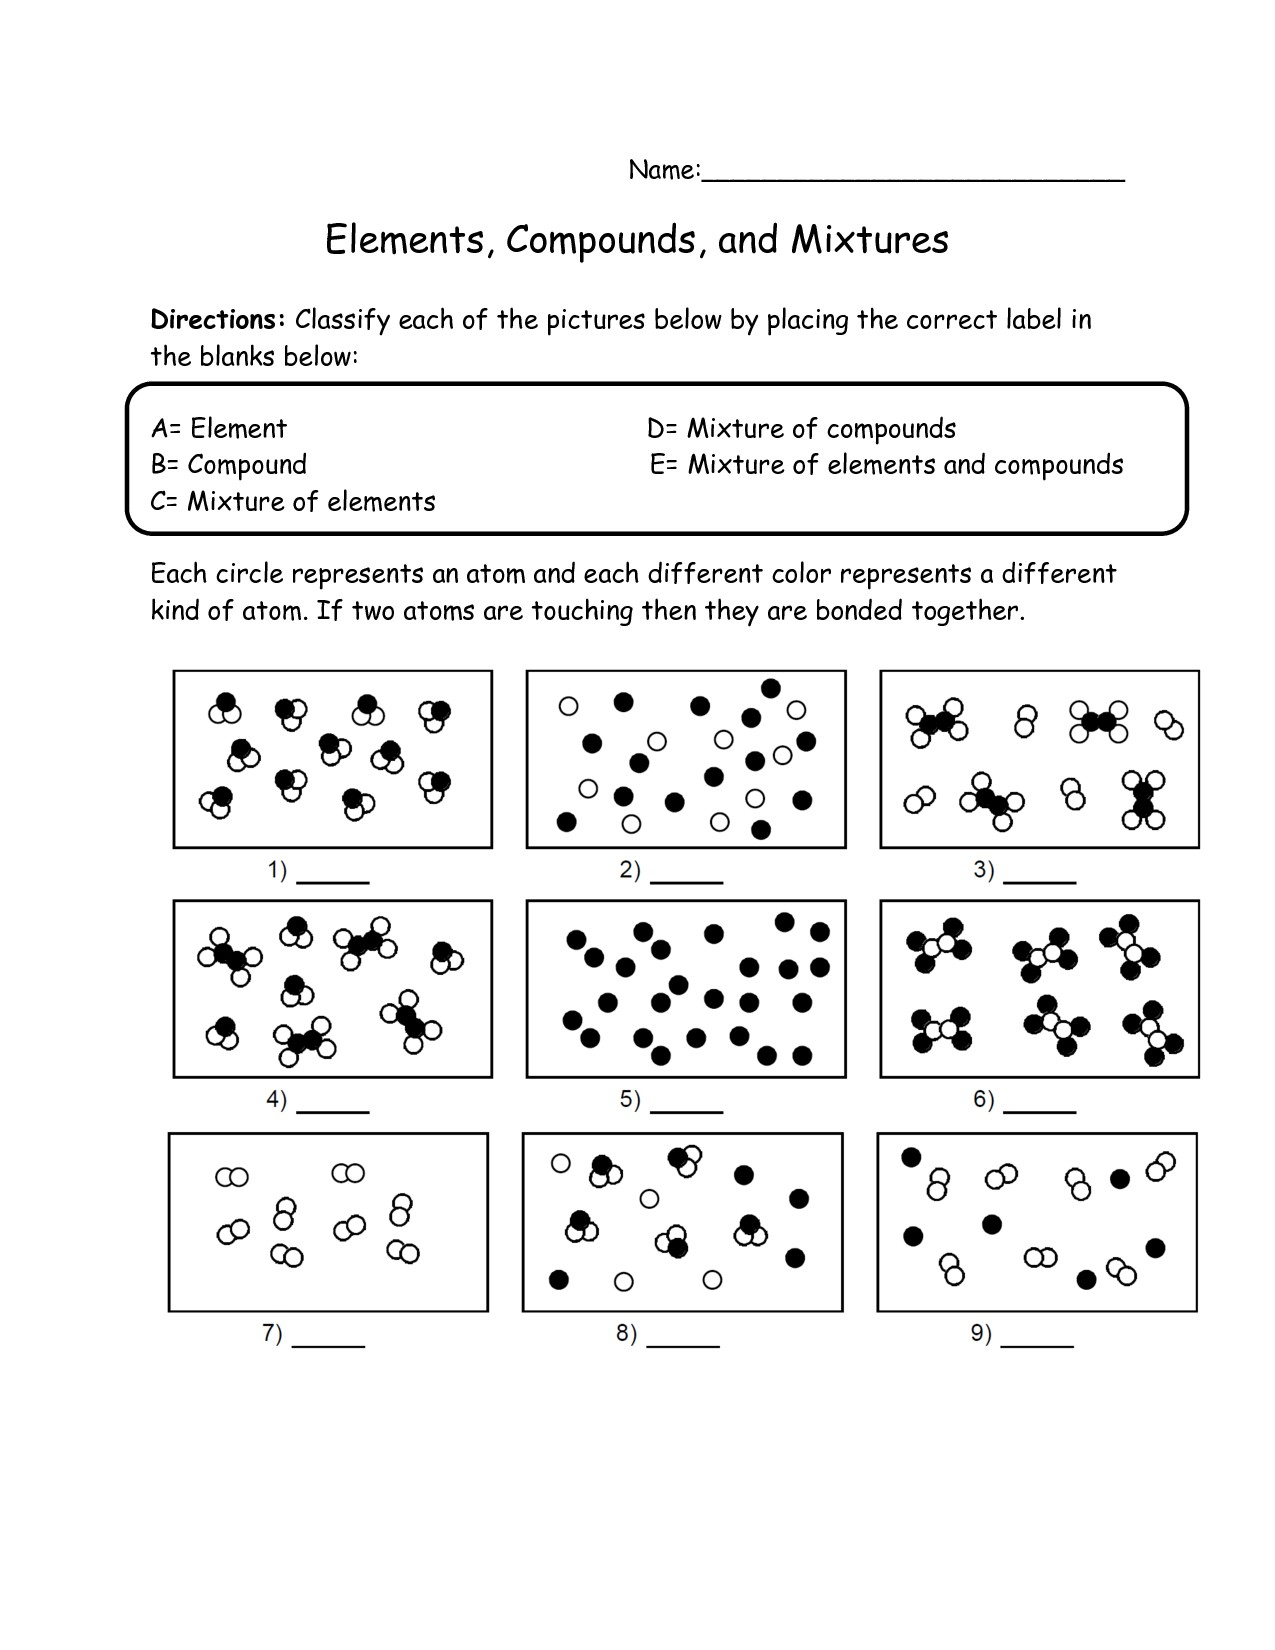 elements-compounds-and-mixtures-worksheet-db-excel